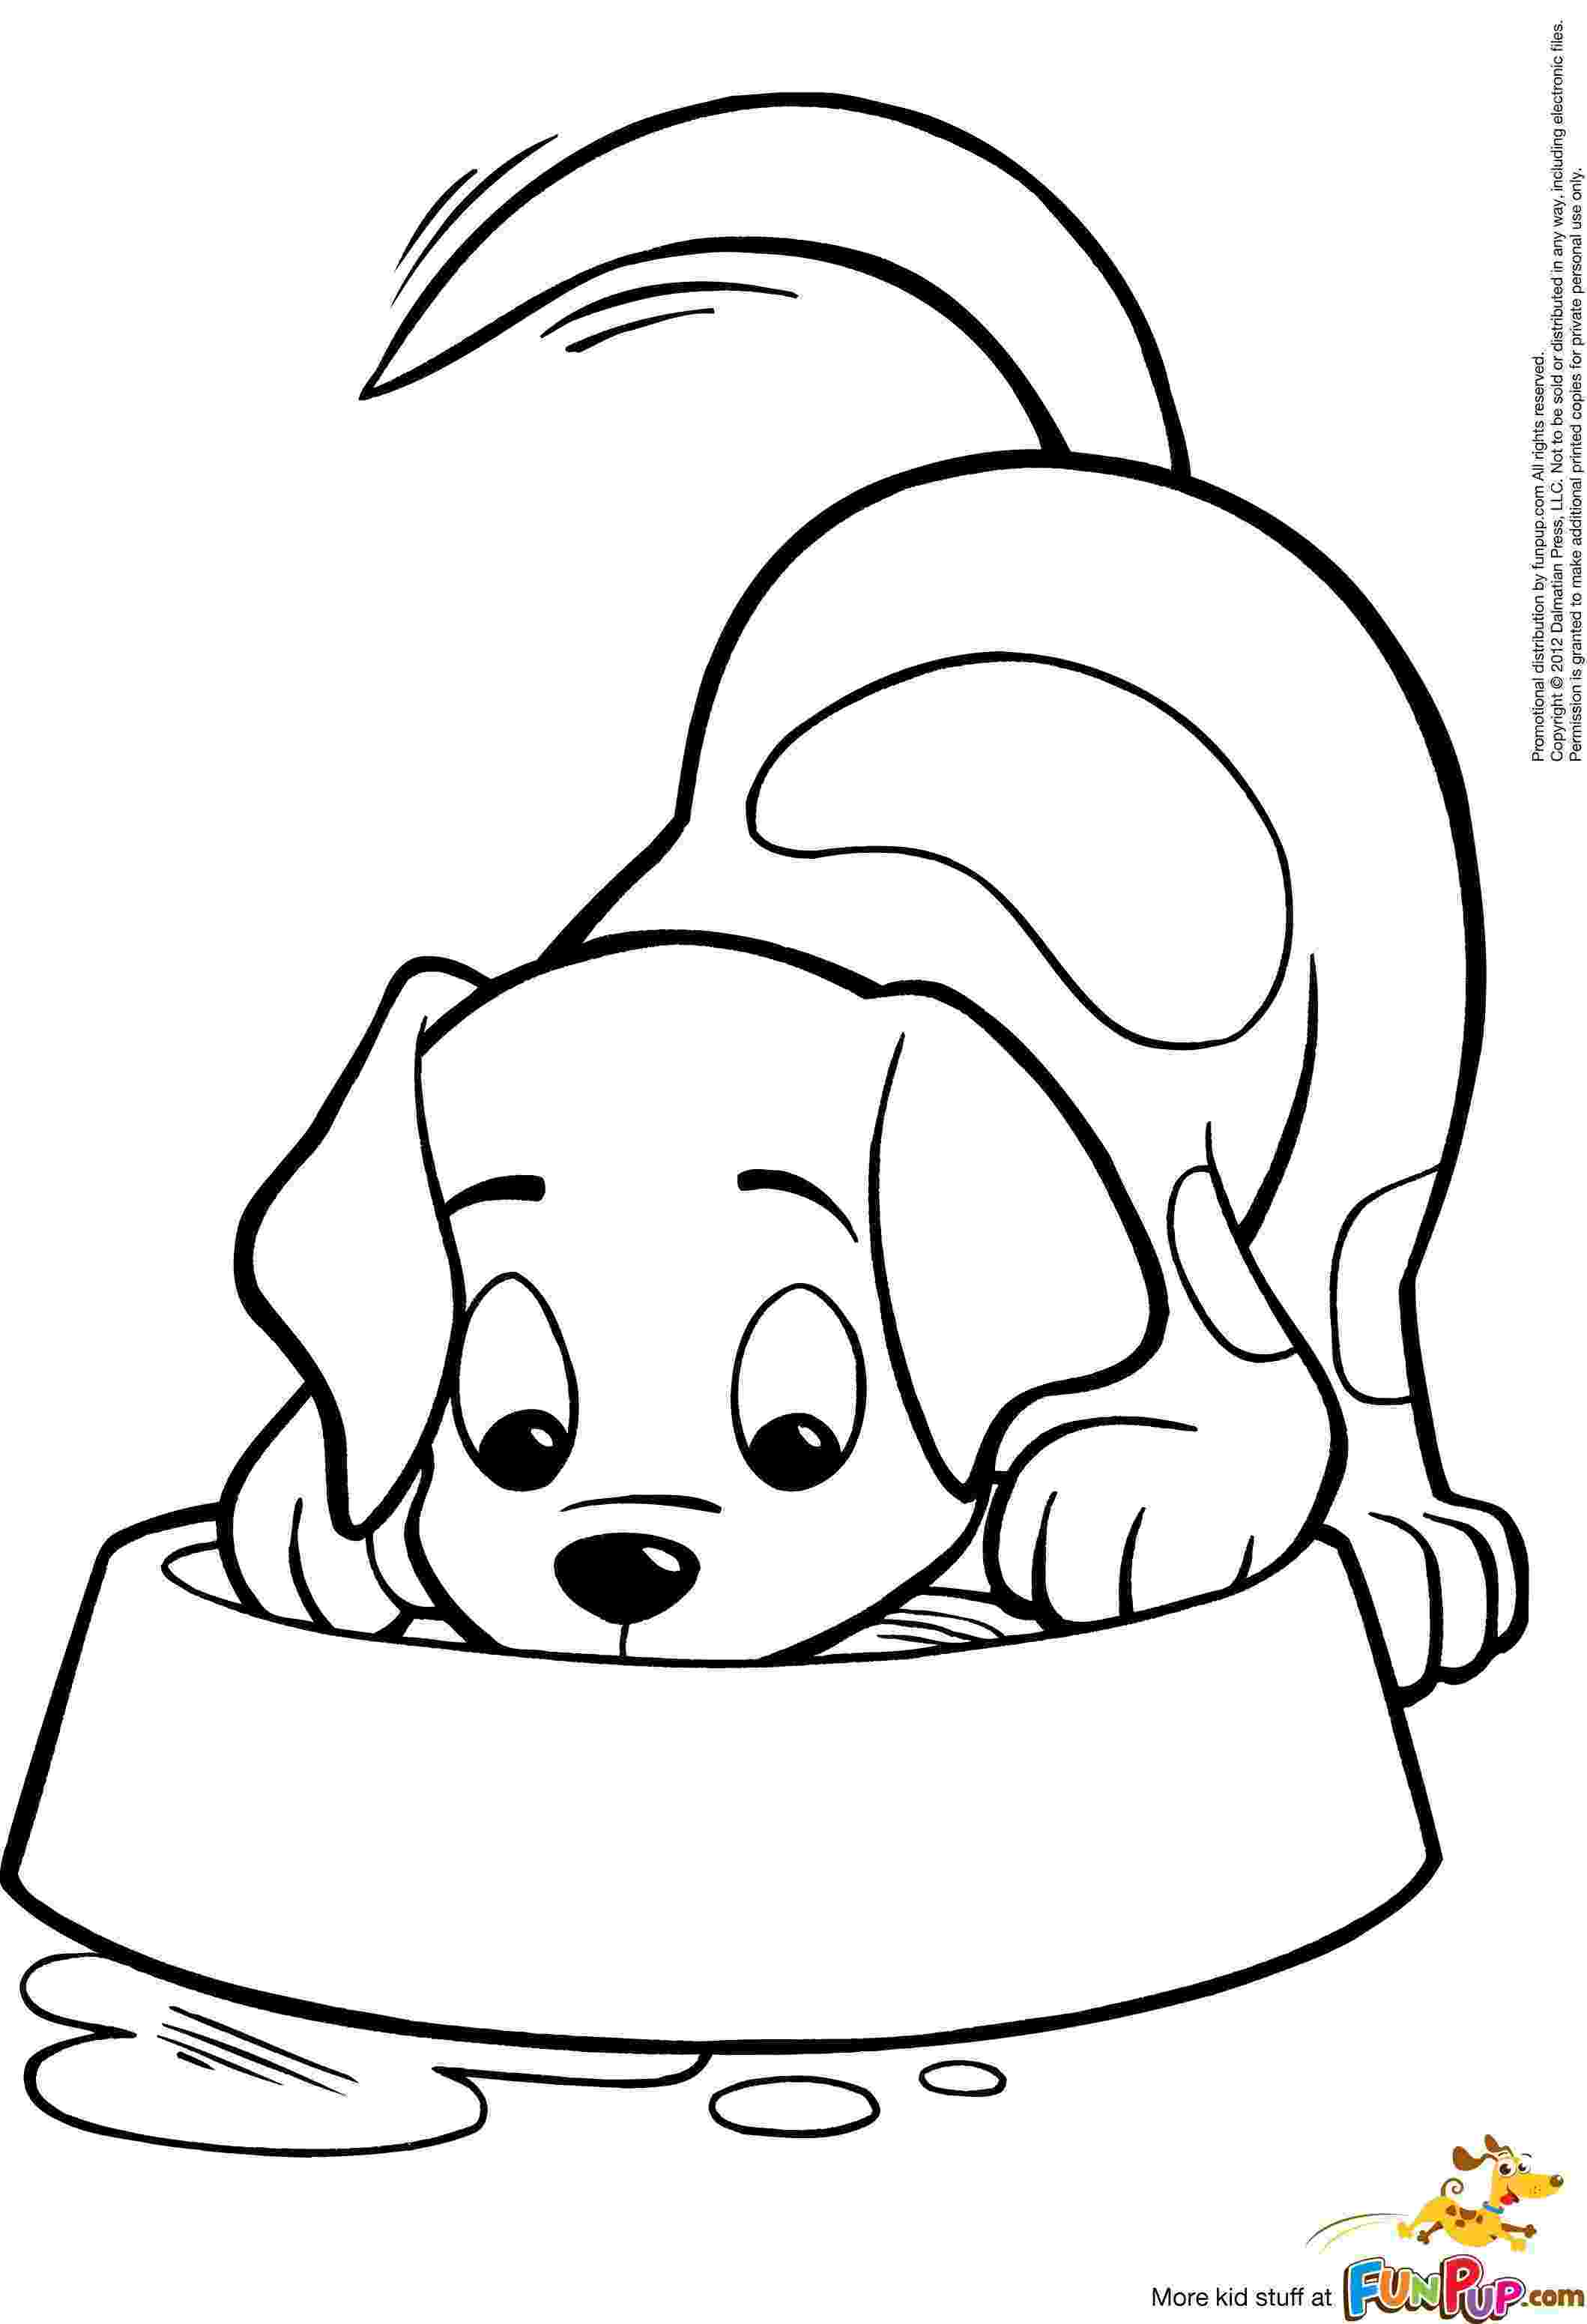 dog pictures coloring pages cute puppy coloring pages for kids free printable pages pictures dog coloring 